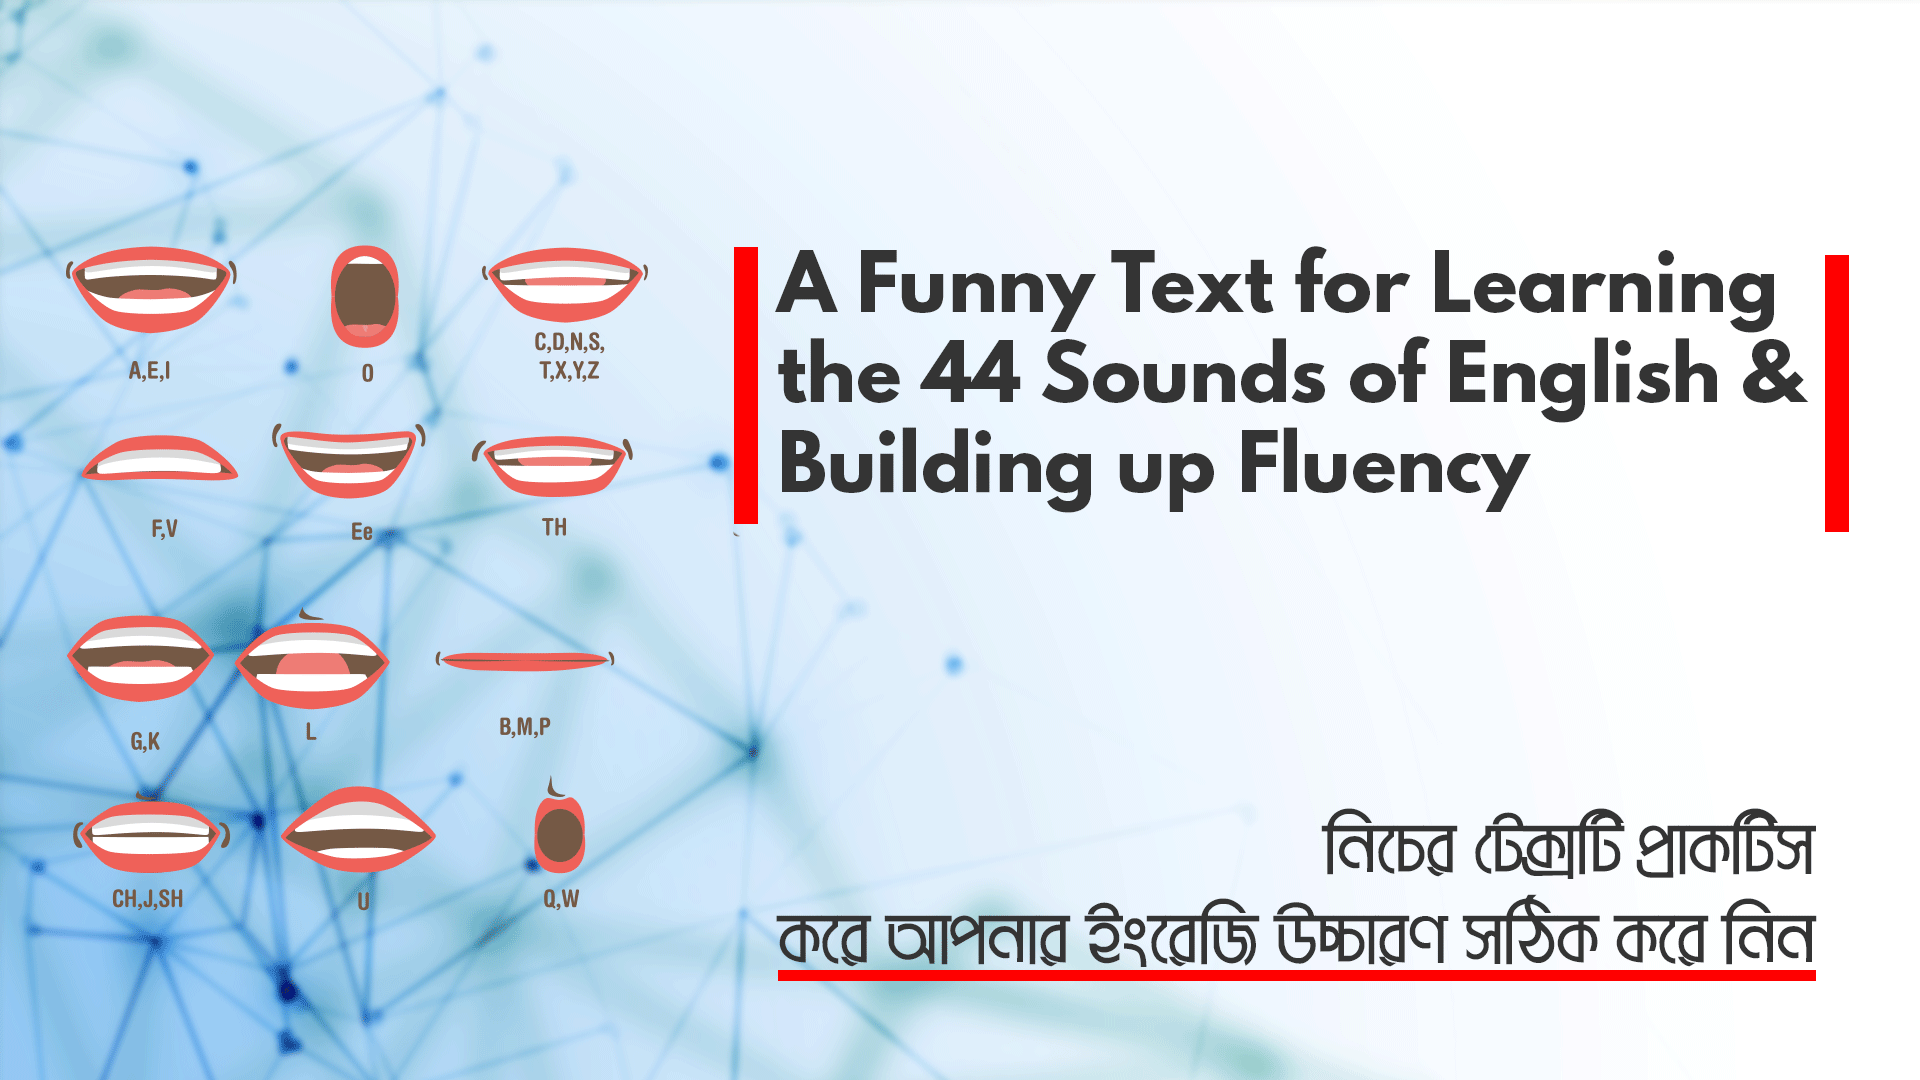 A Funny Text for Learning 44 Sounds